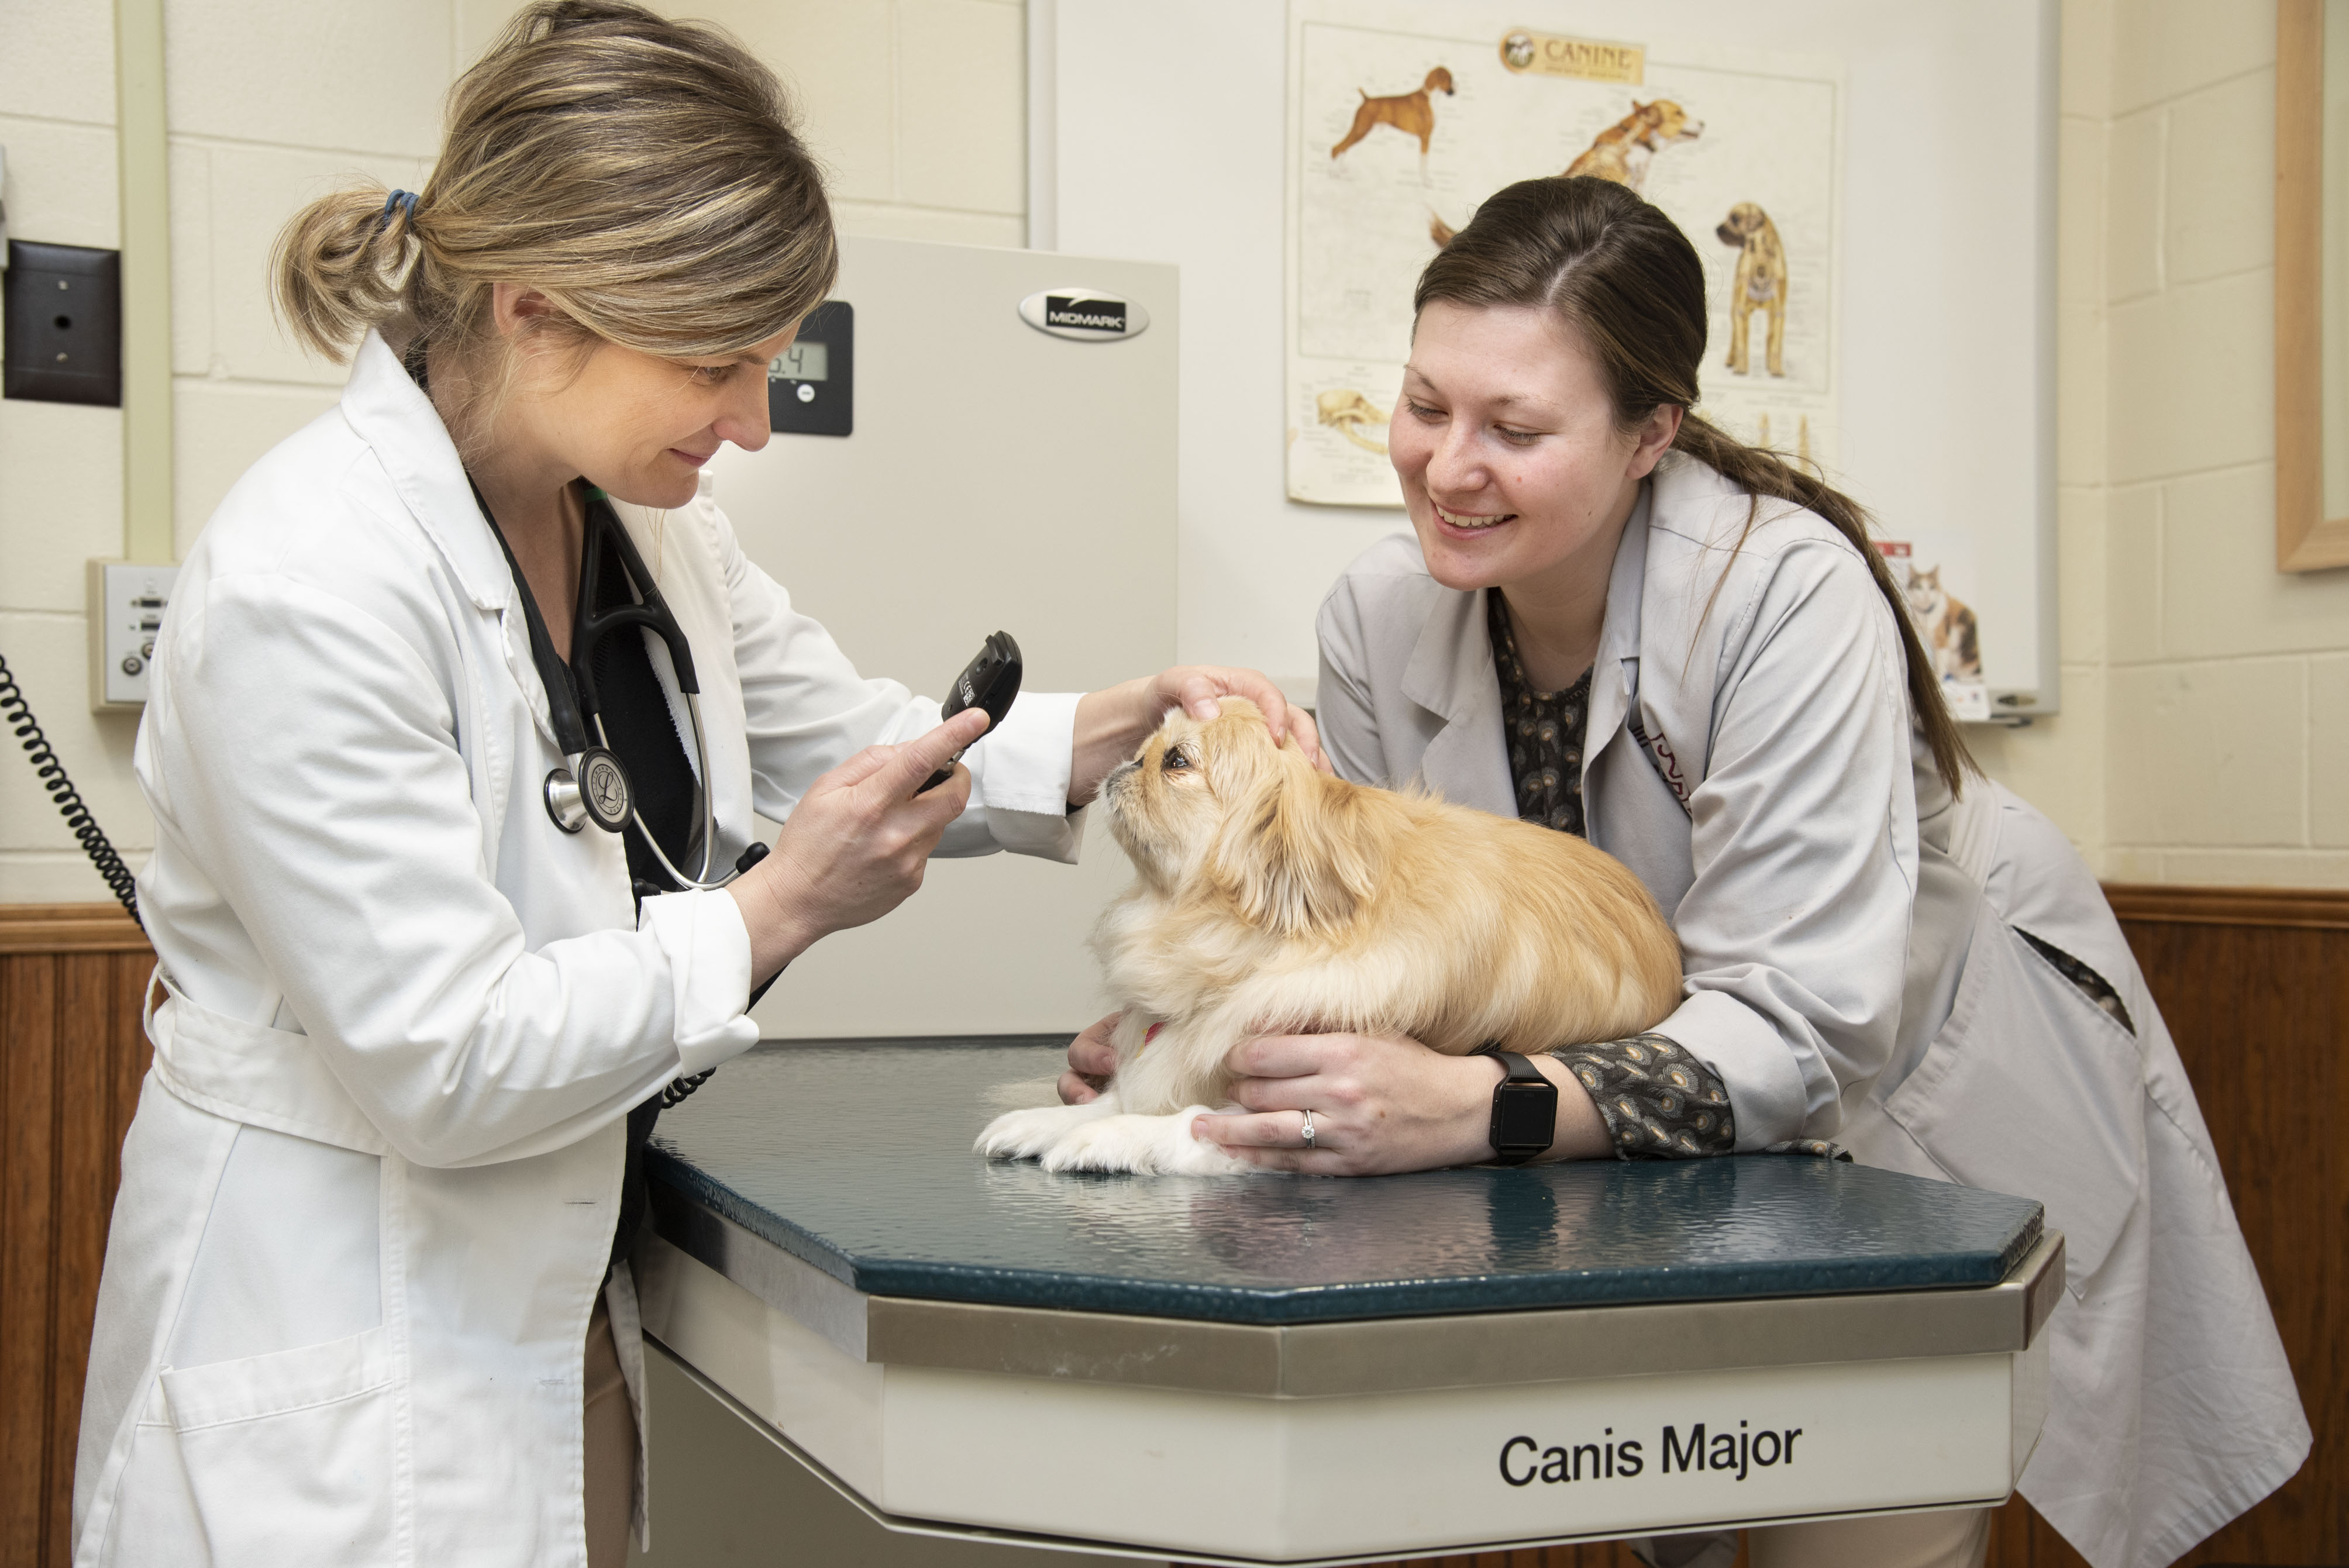 A veterinarian and student examine a small dog